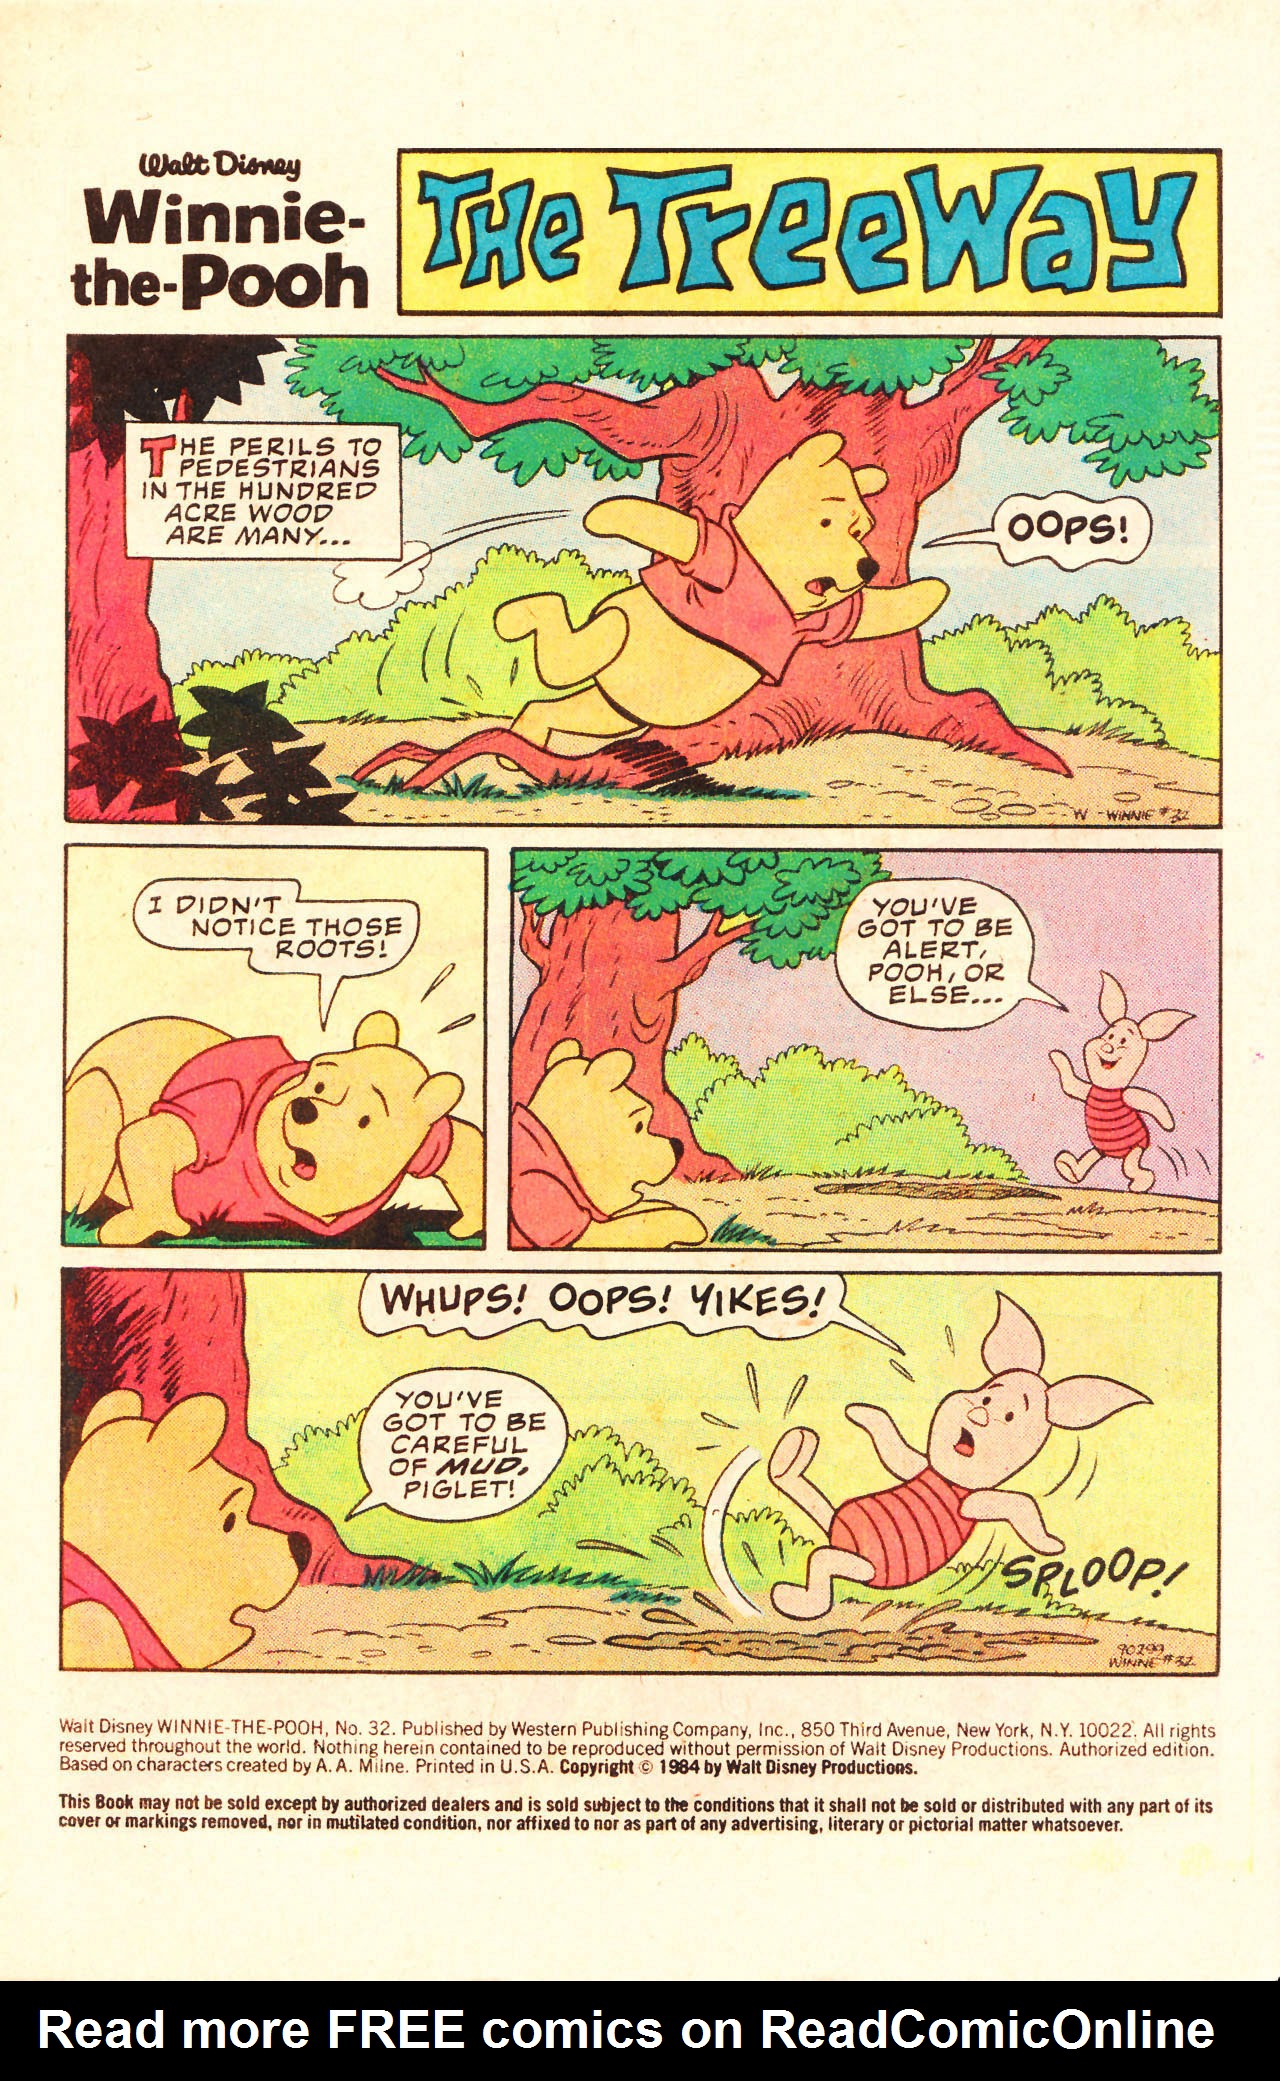 Read online Winnie-the-Pooh comic -  Issue #32 - 3